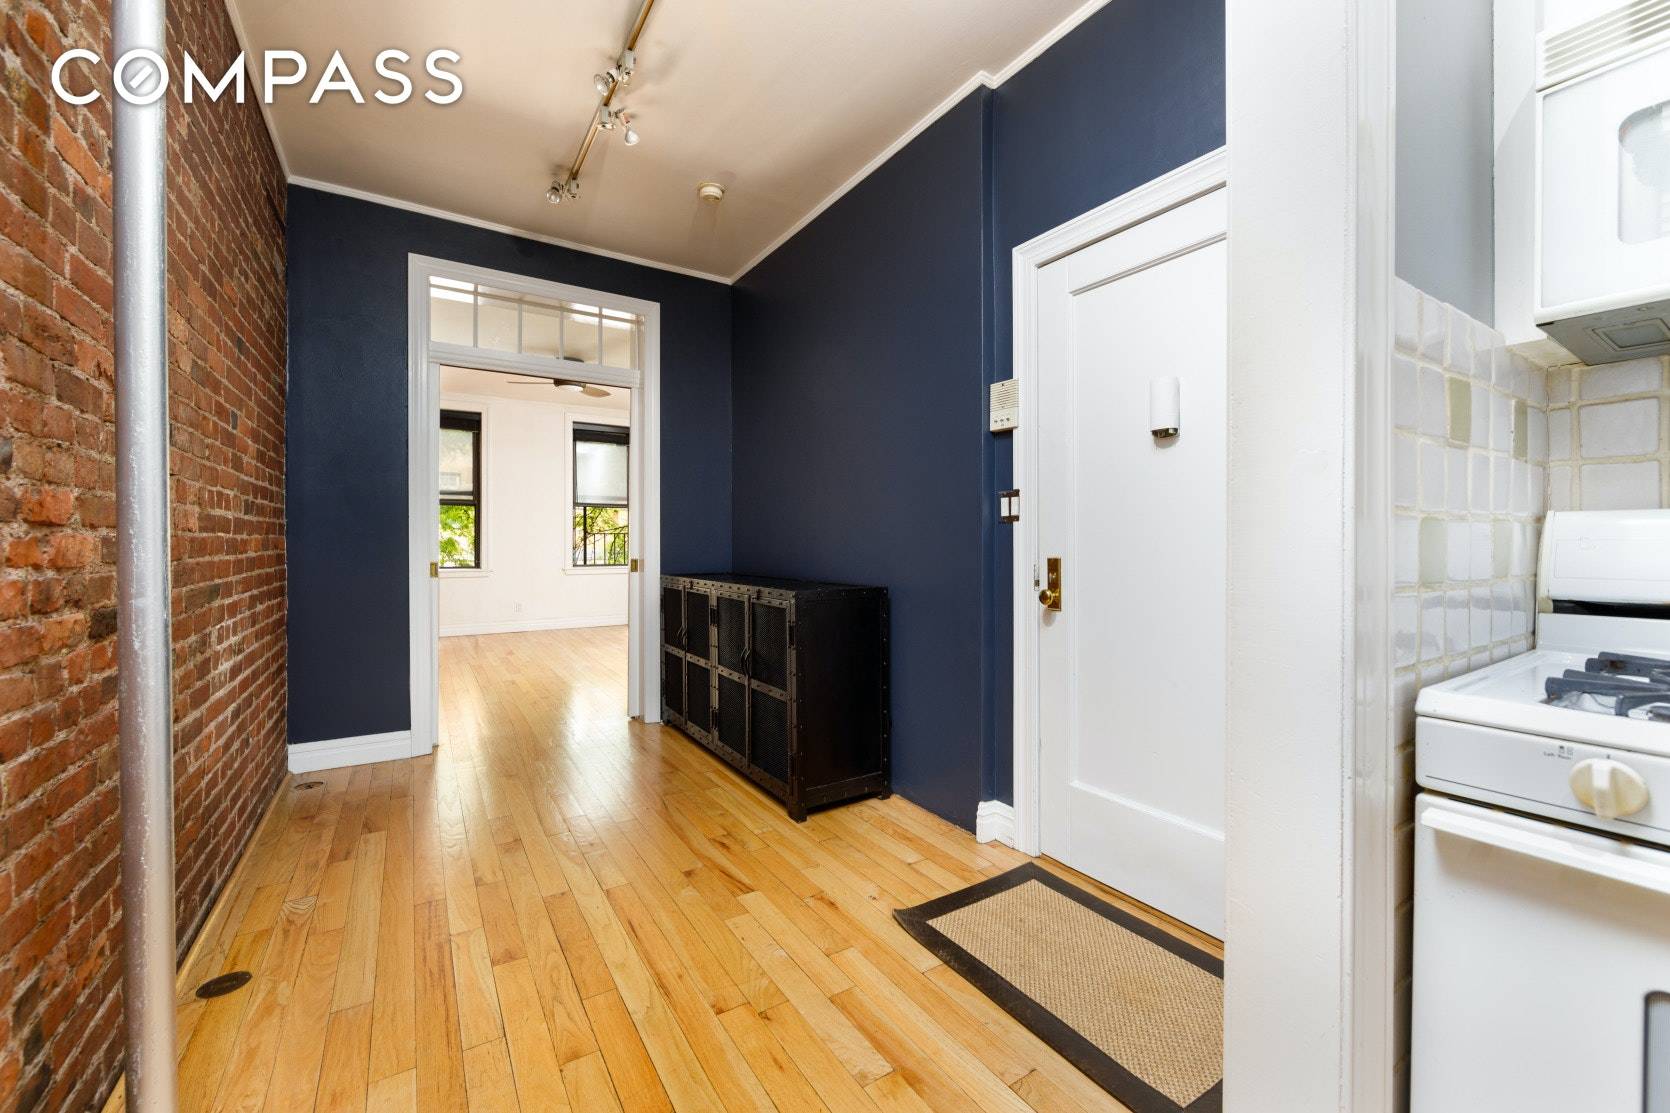 Bright and spacious second floor walkup in excellent prewar low rise on lovely tree lined street in heart of Chelsea.